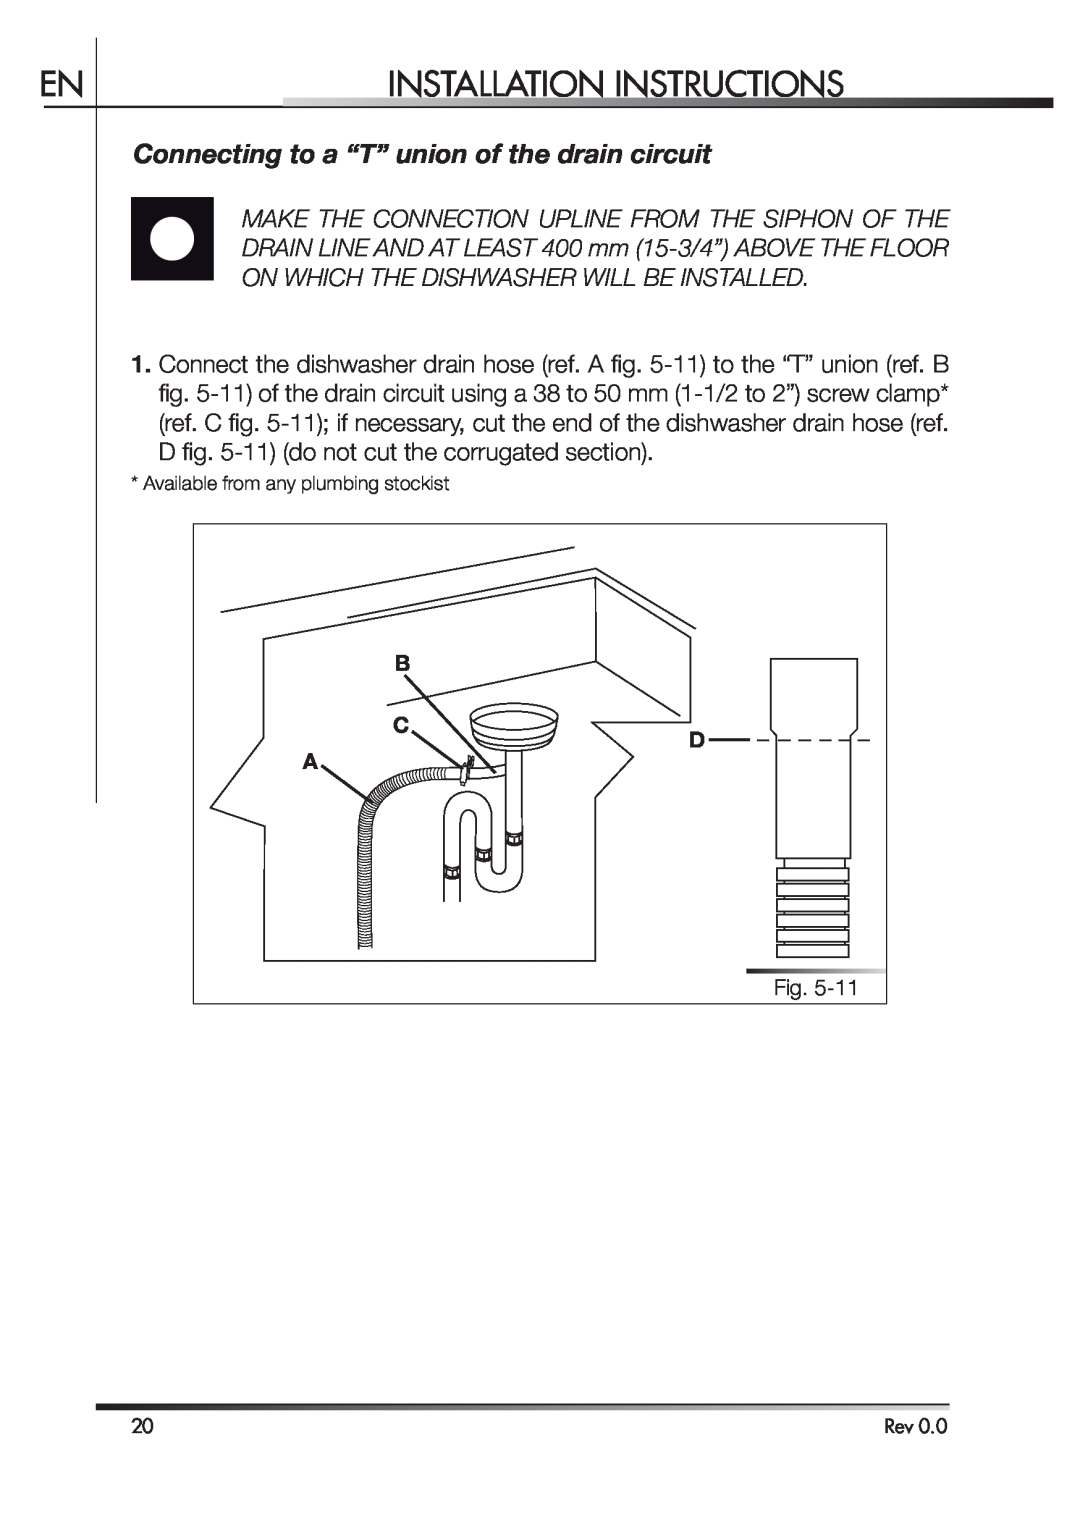 Smeg STA4645 instruction manual Connecting to a “T” union of the drain circuit, Installation Instructions 